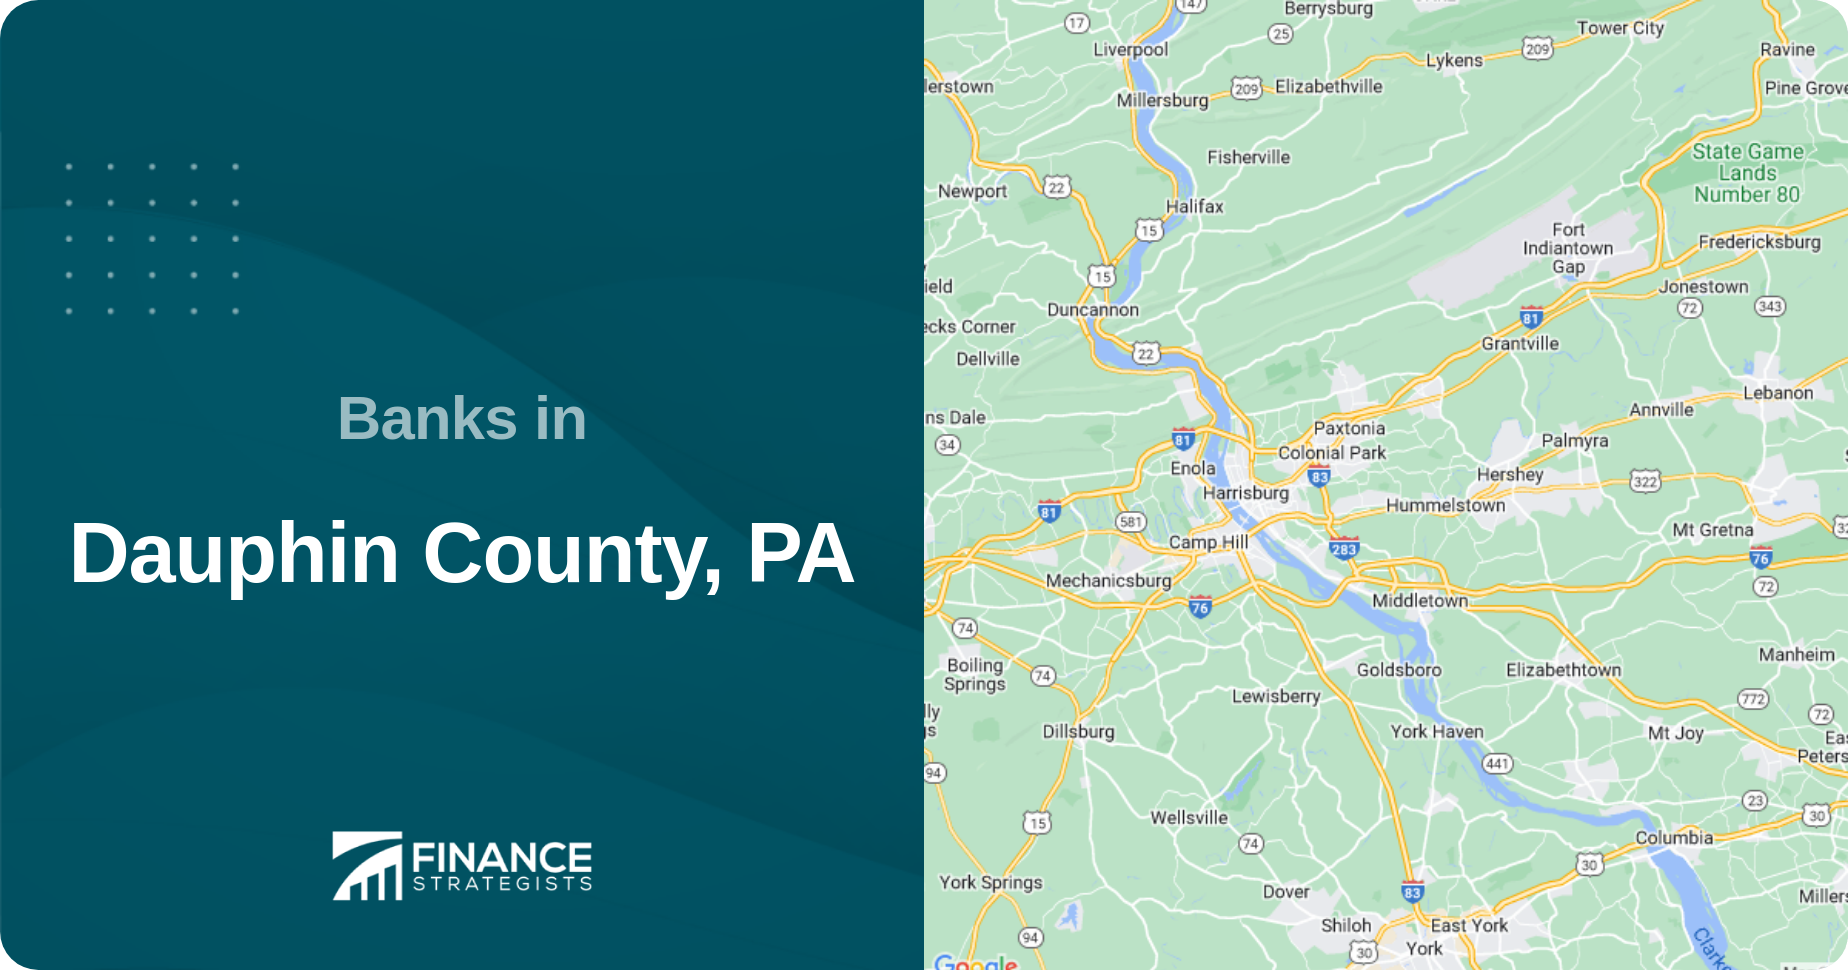 Banks in Dauphin County, PA